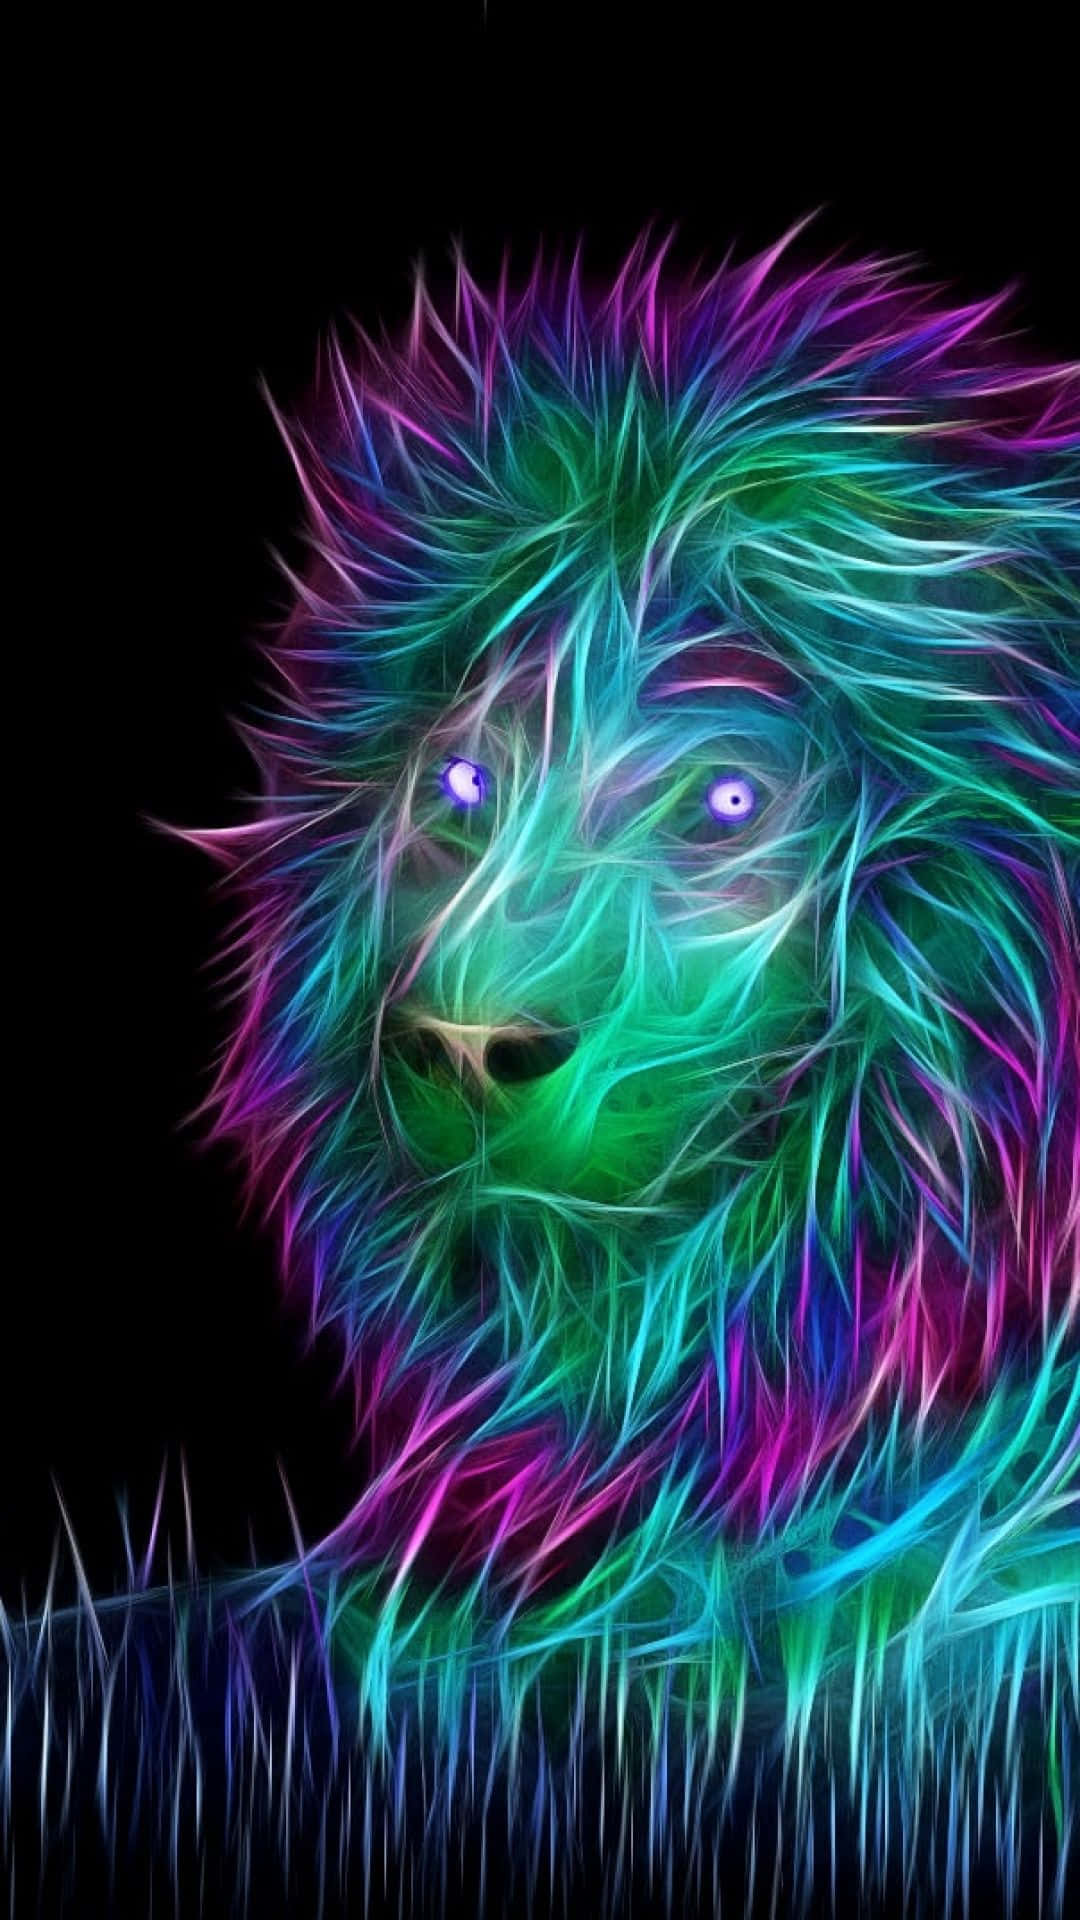 A pride of majestic lions